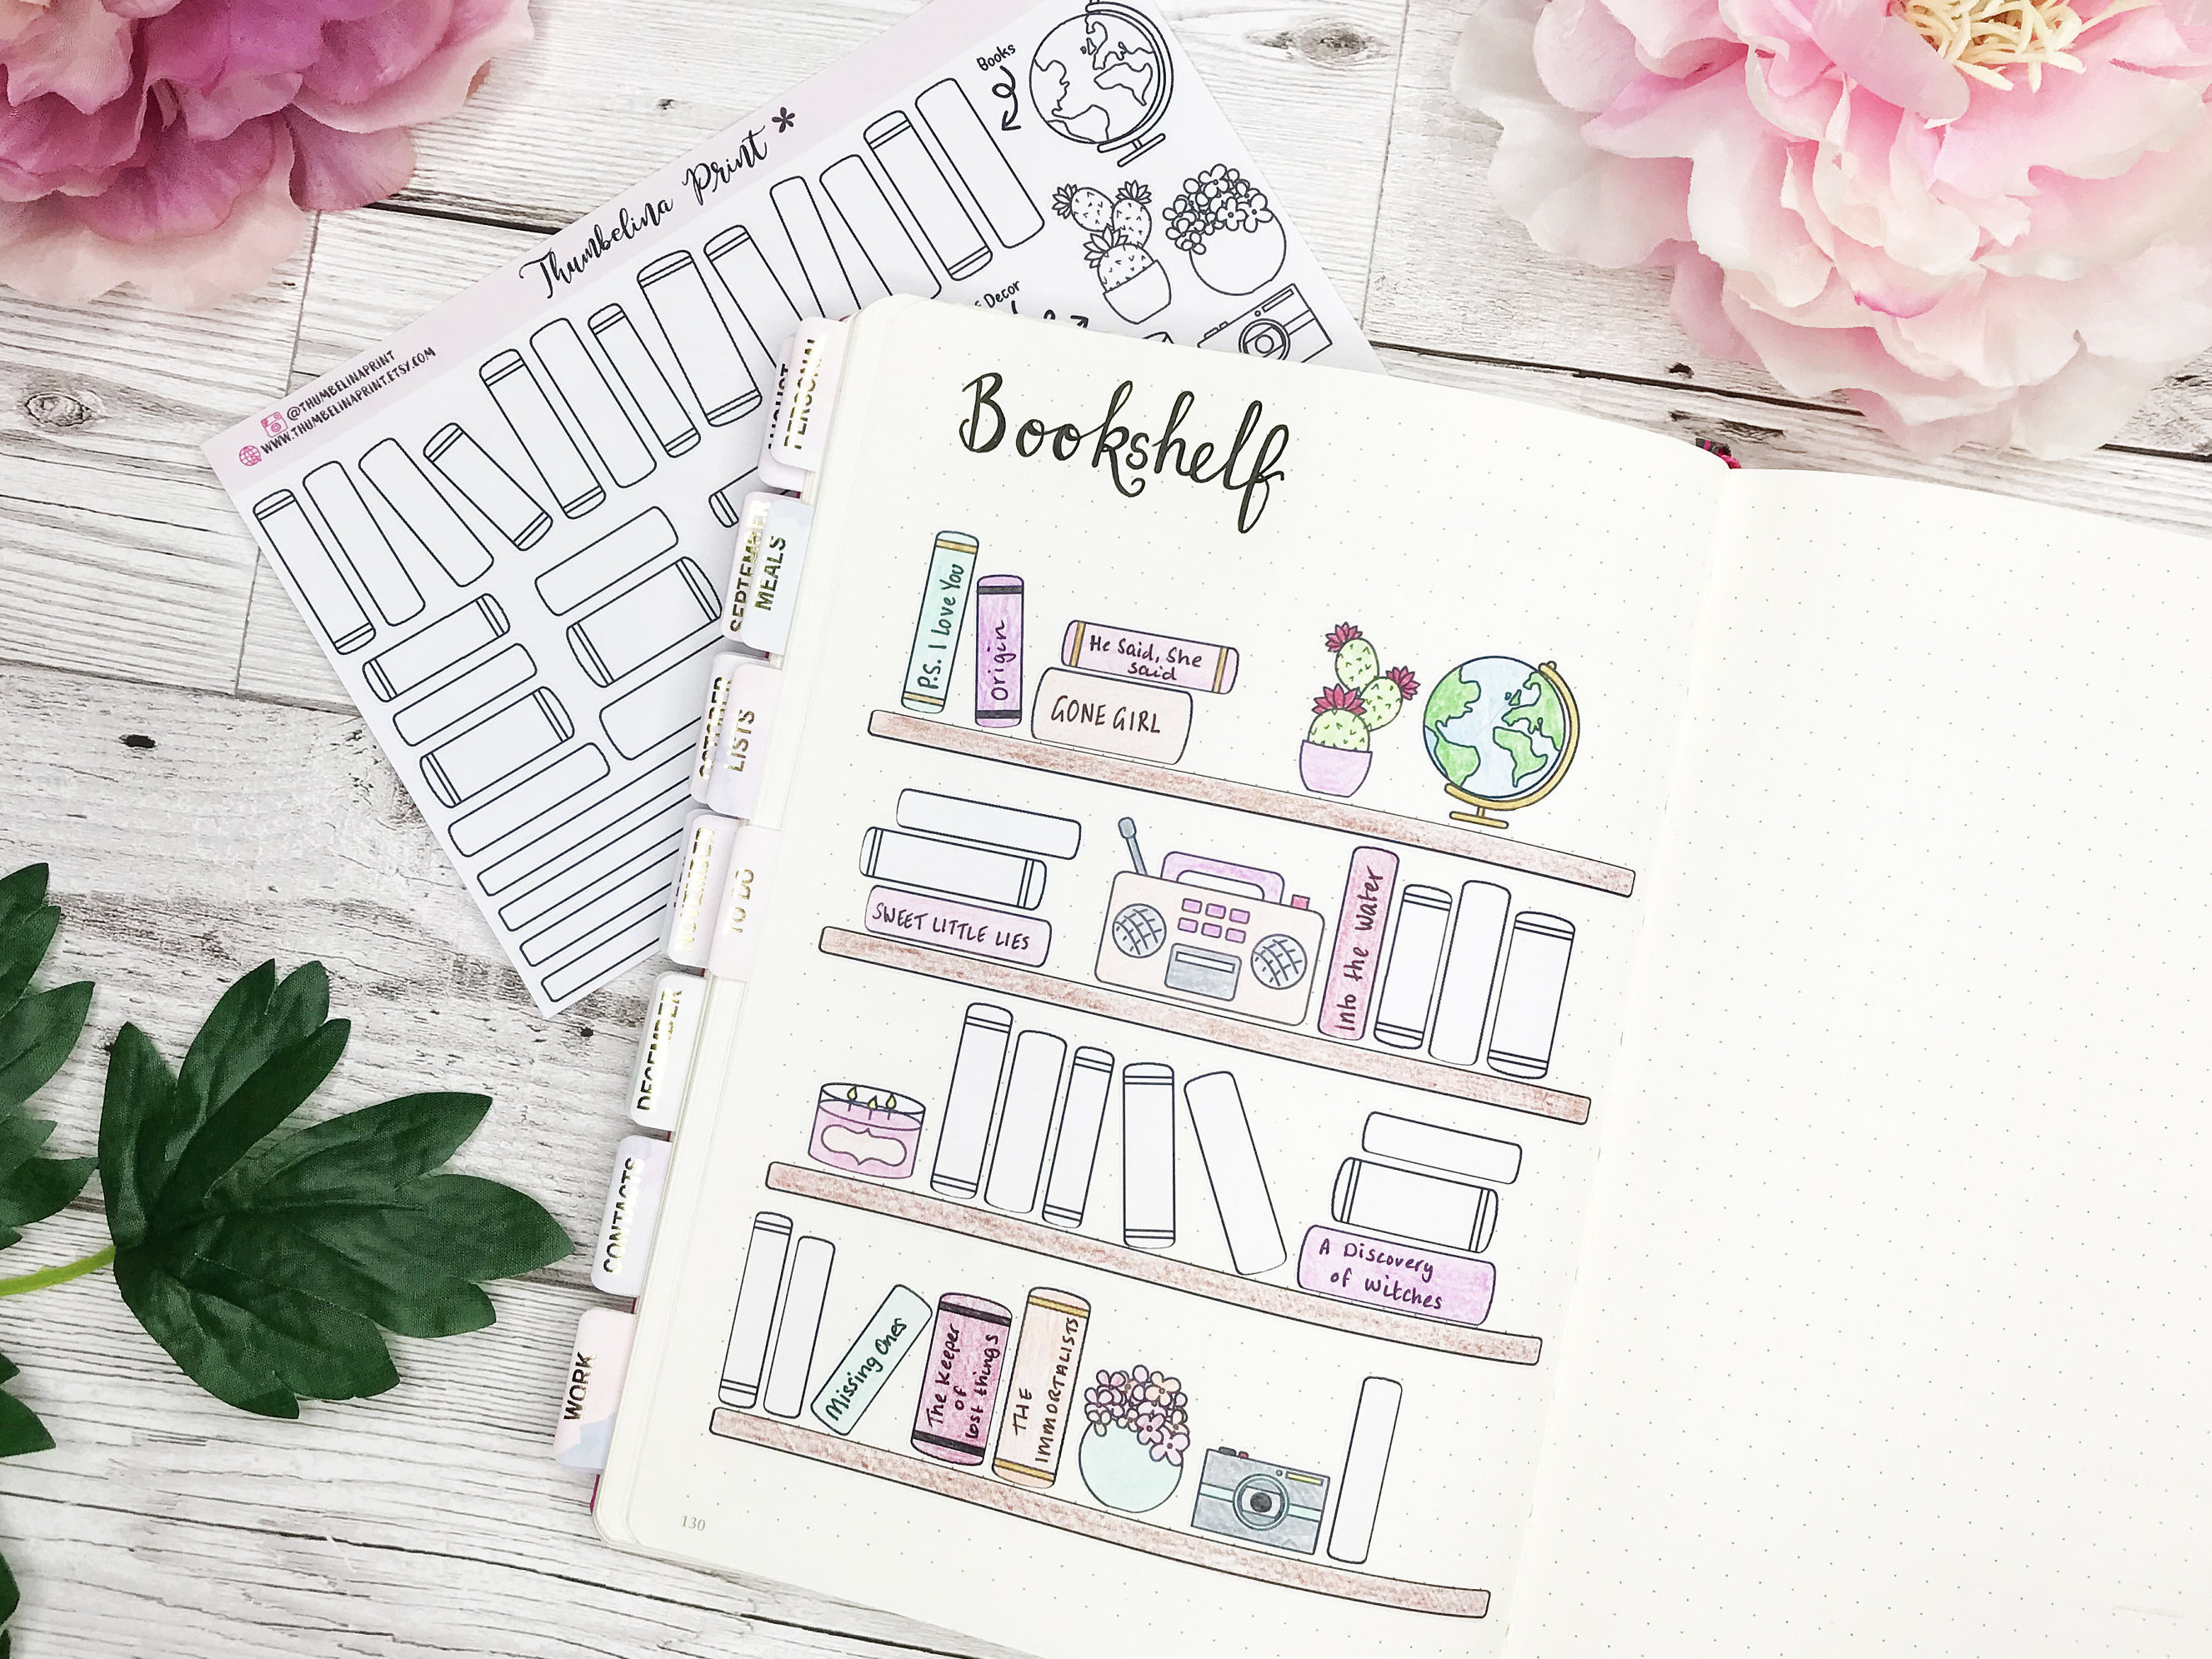 Reading Log Stickers for Bullet Journals. Stickers for Planners